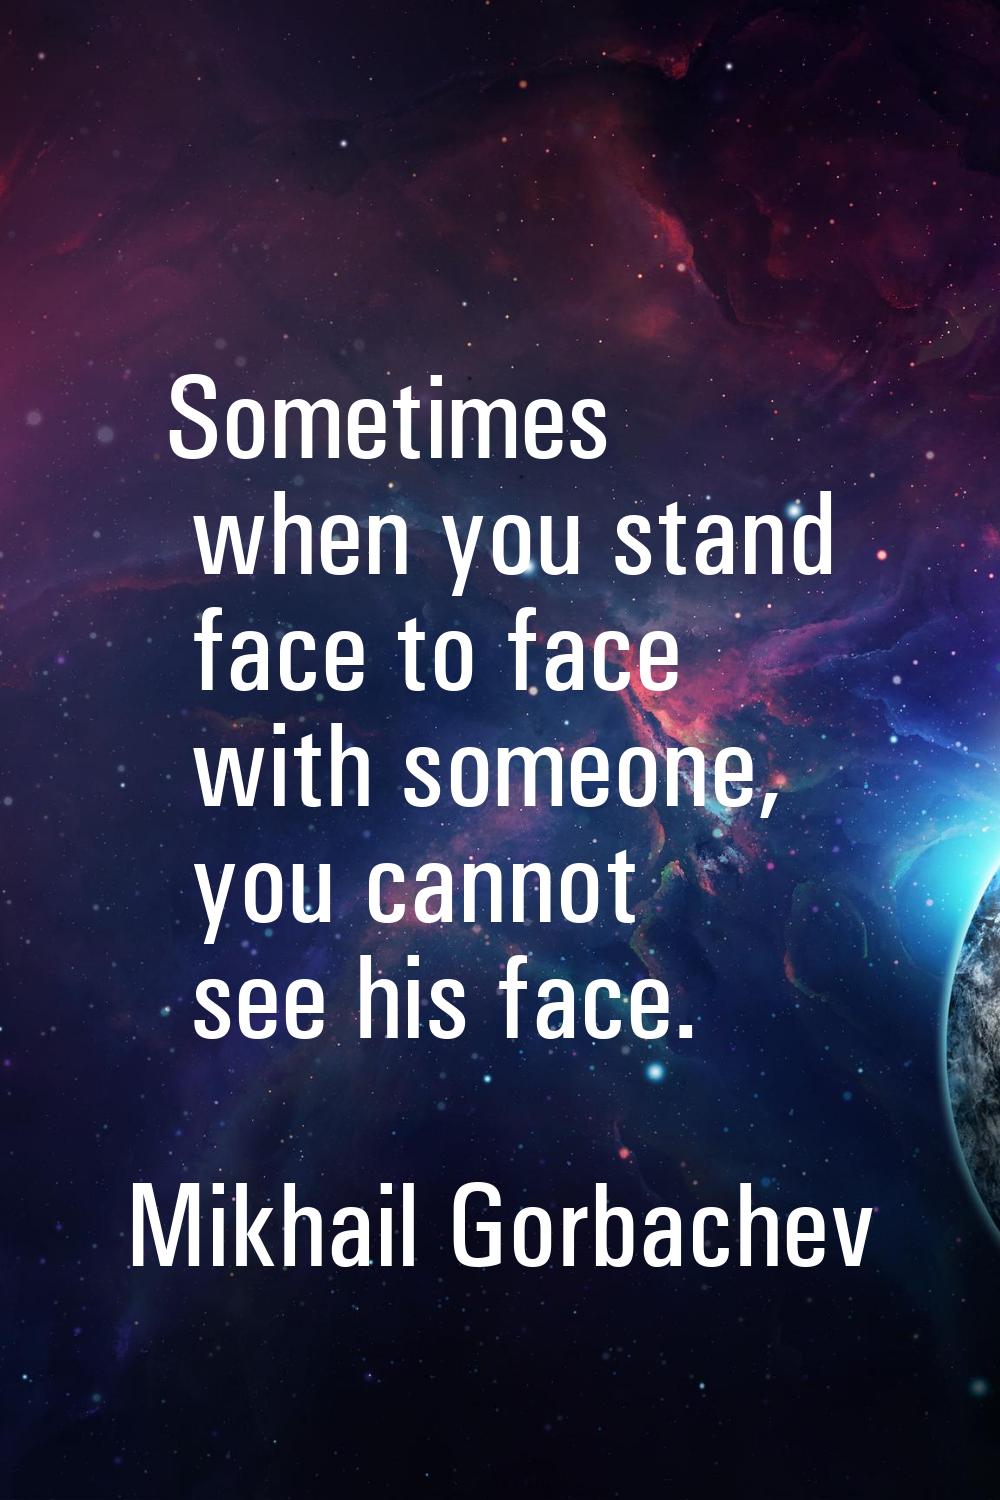 Sometimes when you stand face to face with someone, you cannot see his face.